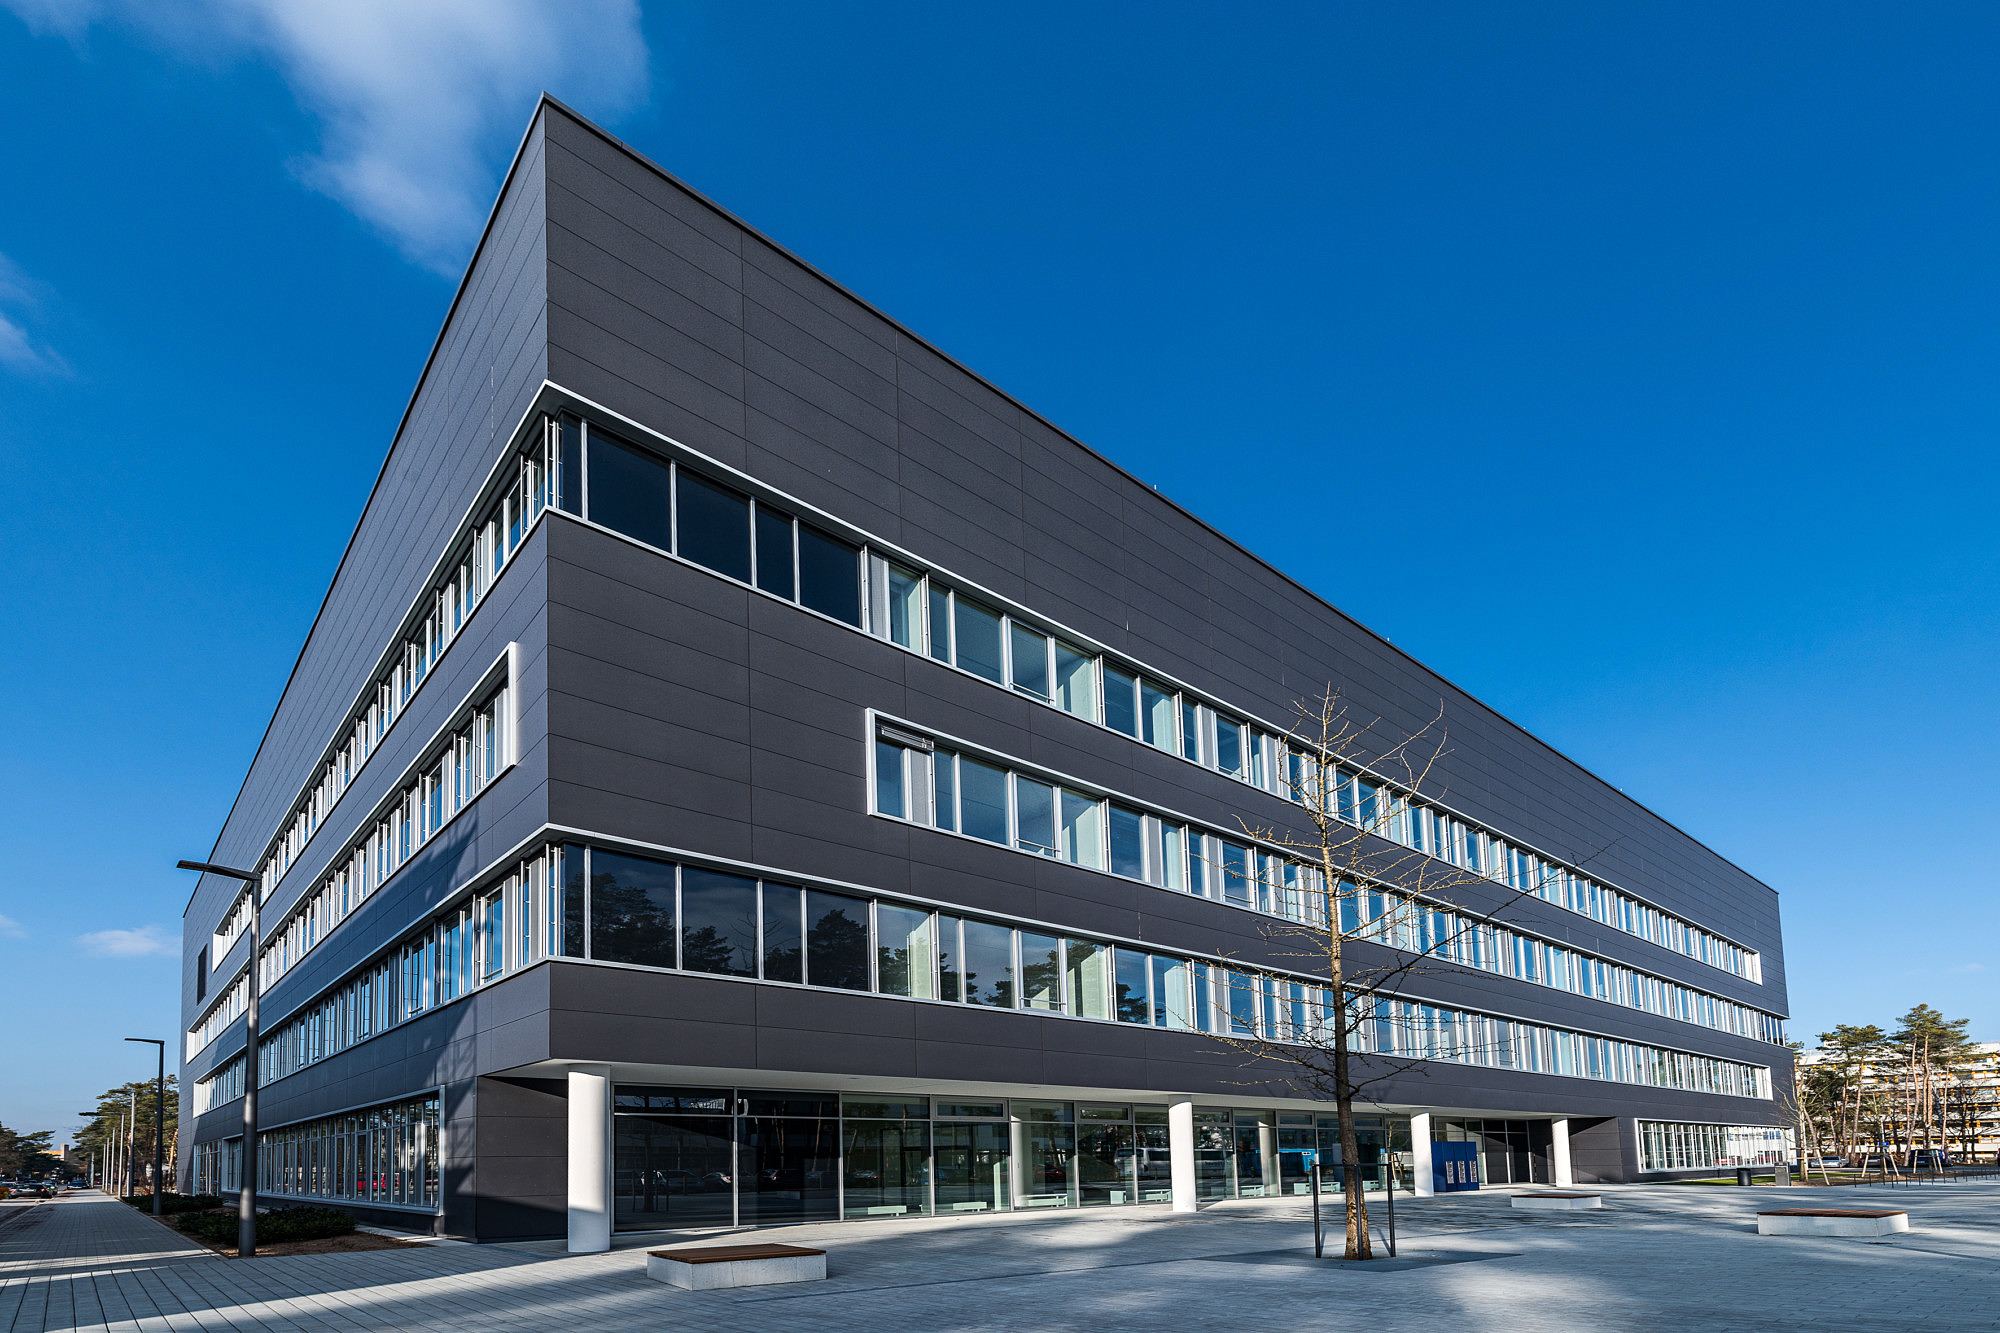 Frontal view of the research building IZNF at Cauerstrasse 3 in Erlangen, where our offices are located.